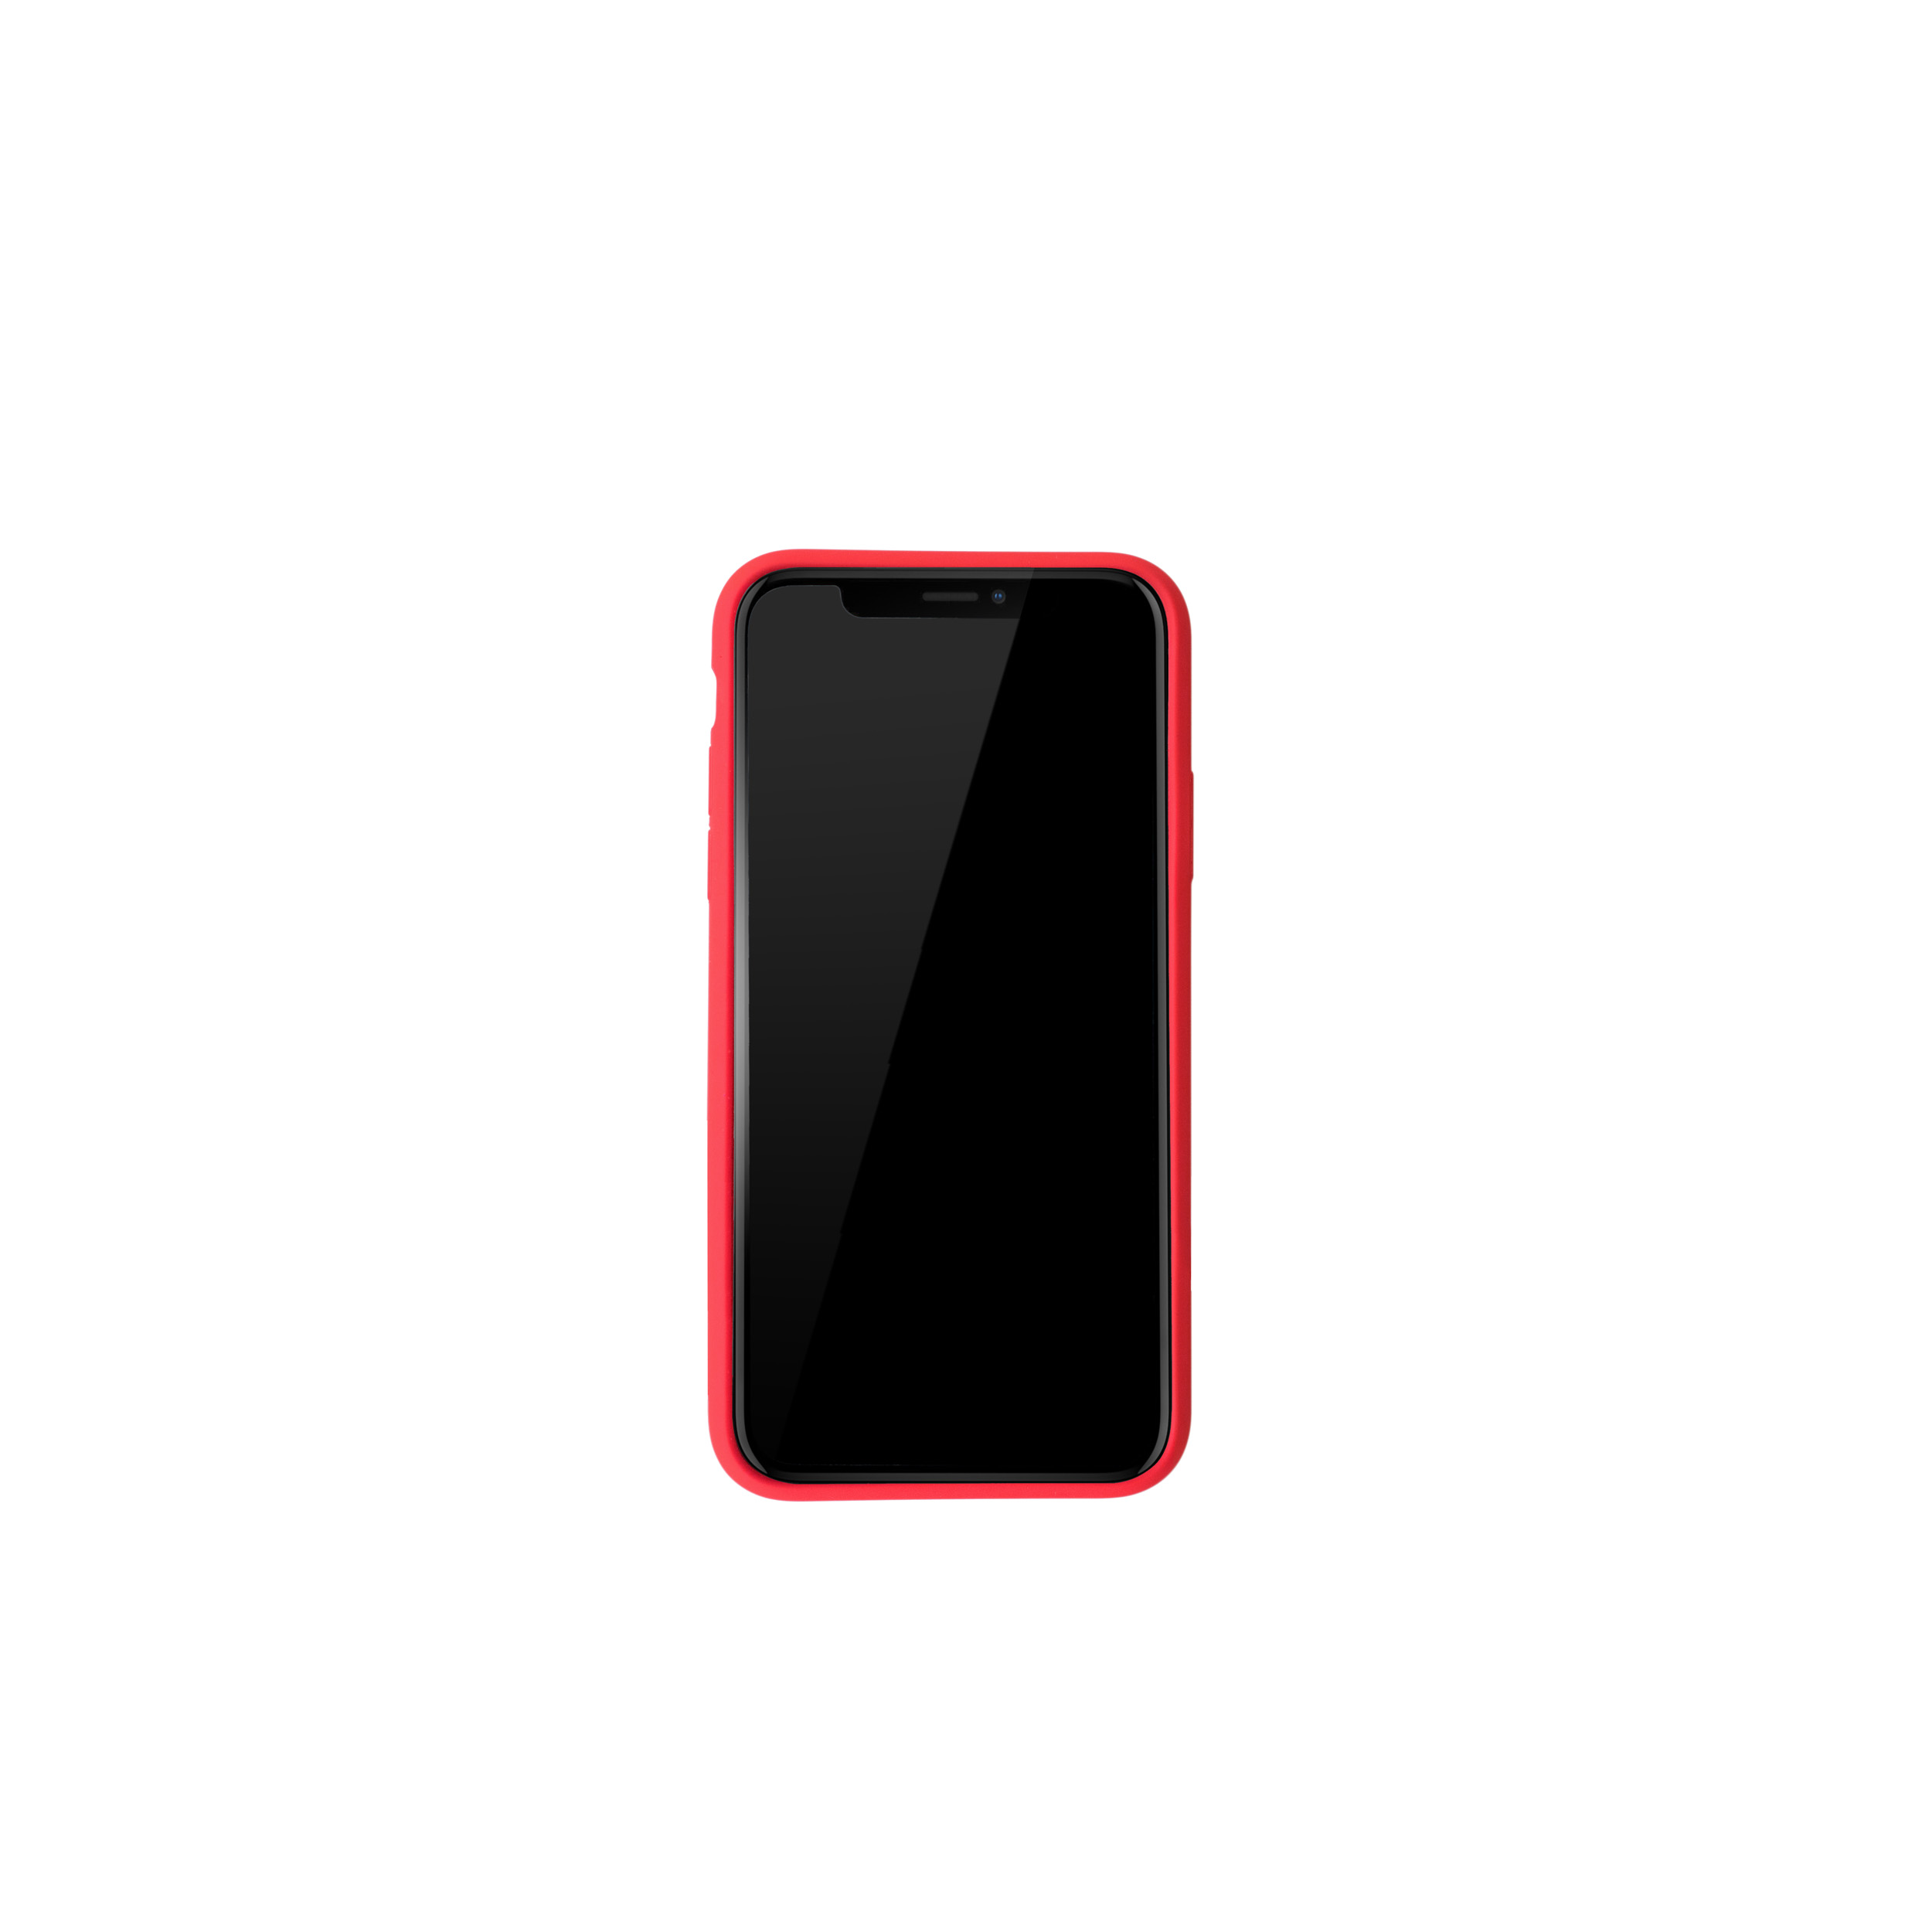 KMP Silikon Schutzhülle für 11 iPhone iPhone red Red, Pro, Backcover, Apple, 11 Pro